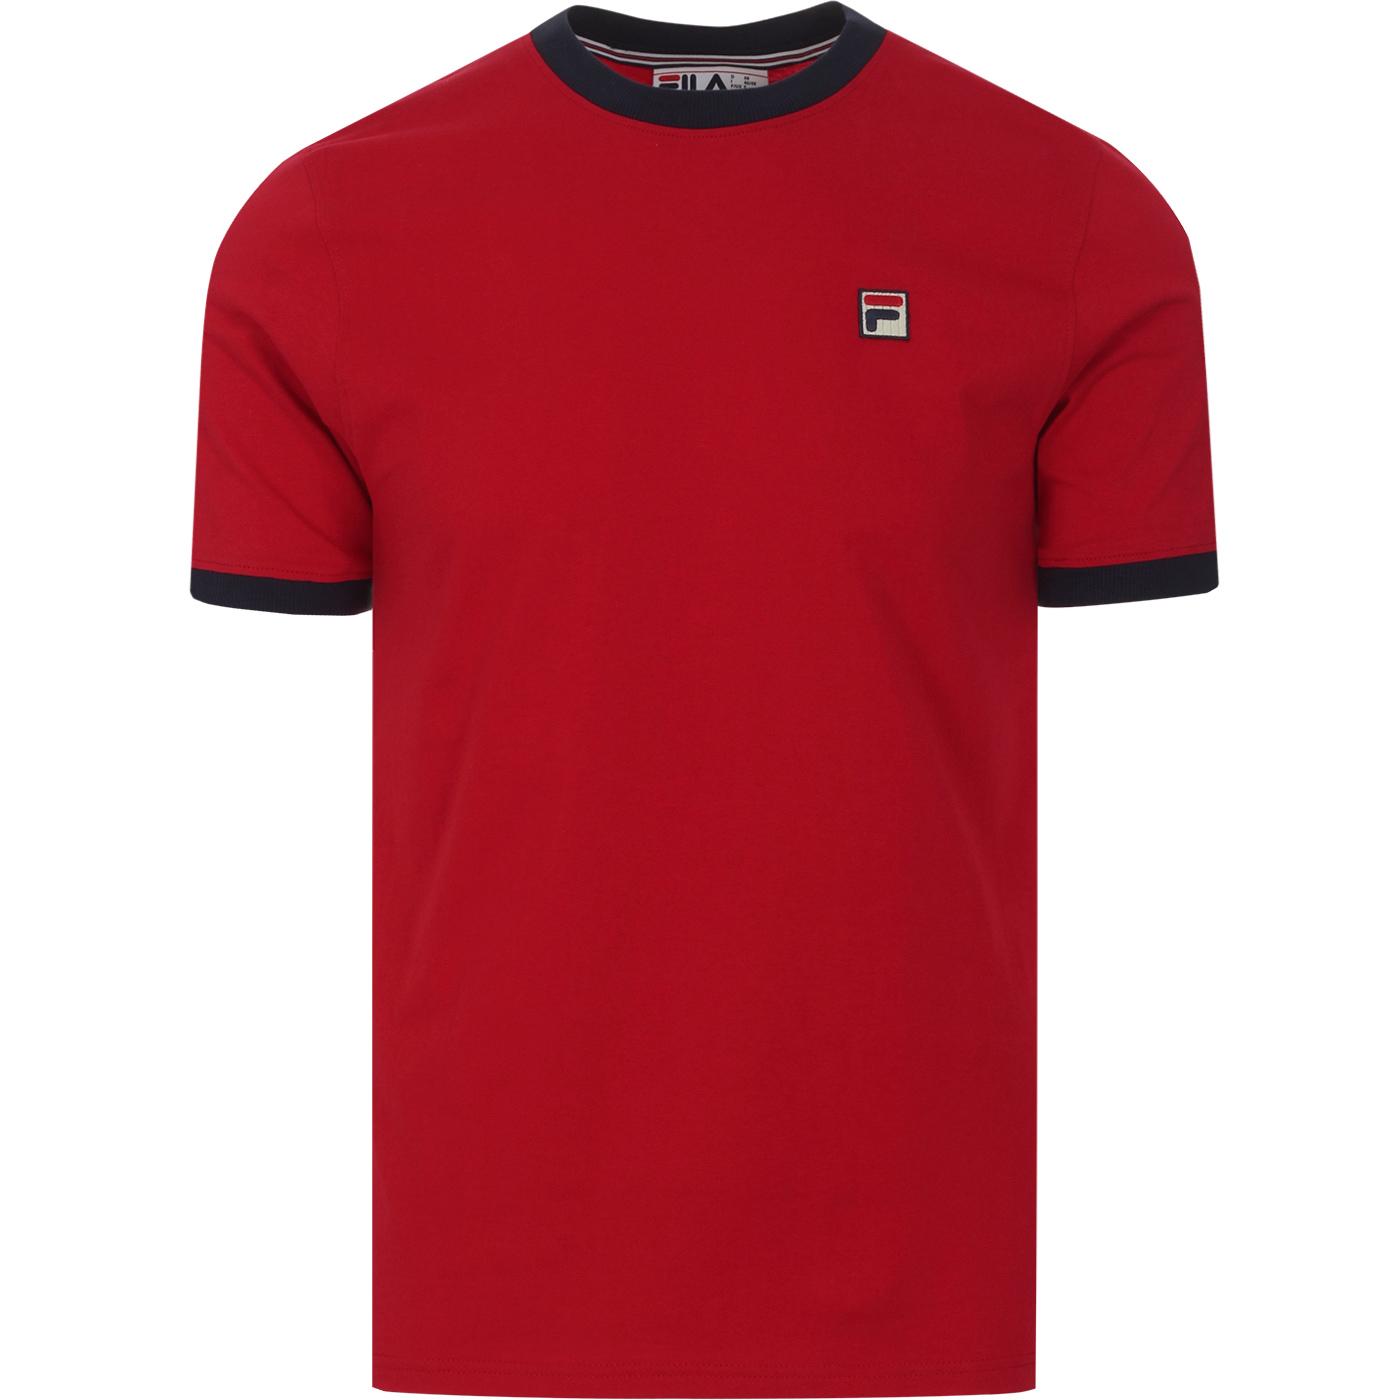 FILA VINTAGE Marconi Retro 70s Ringer Tee in Chinese Red